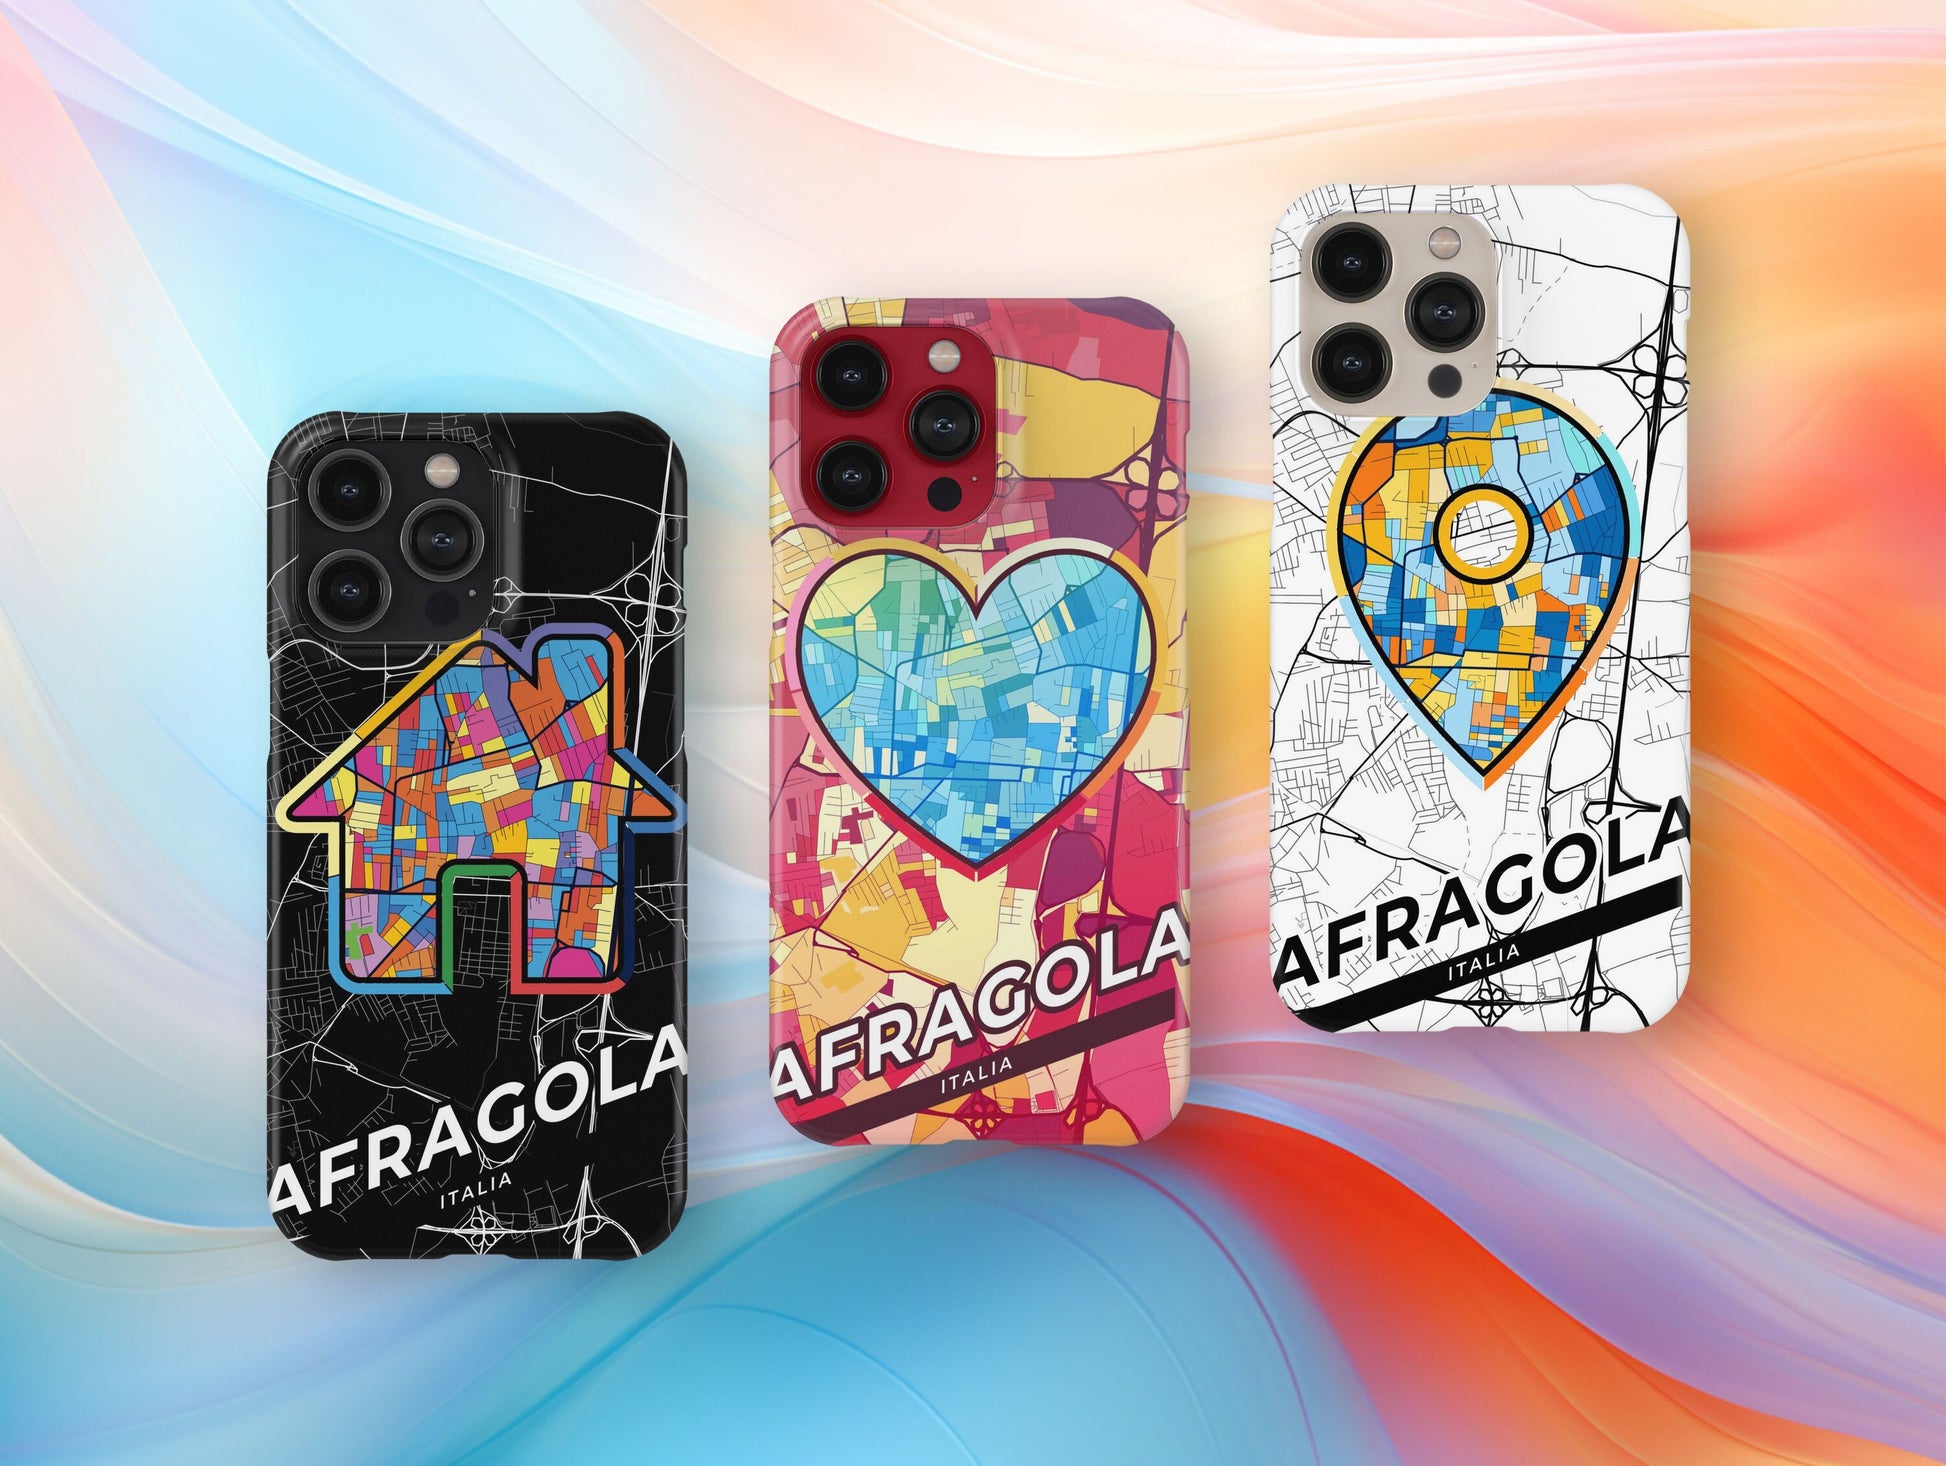 Afragola Italy slim phone case with colorful icon. Birthday, wedding or housewarming gift. Couple match cases.